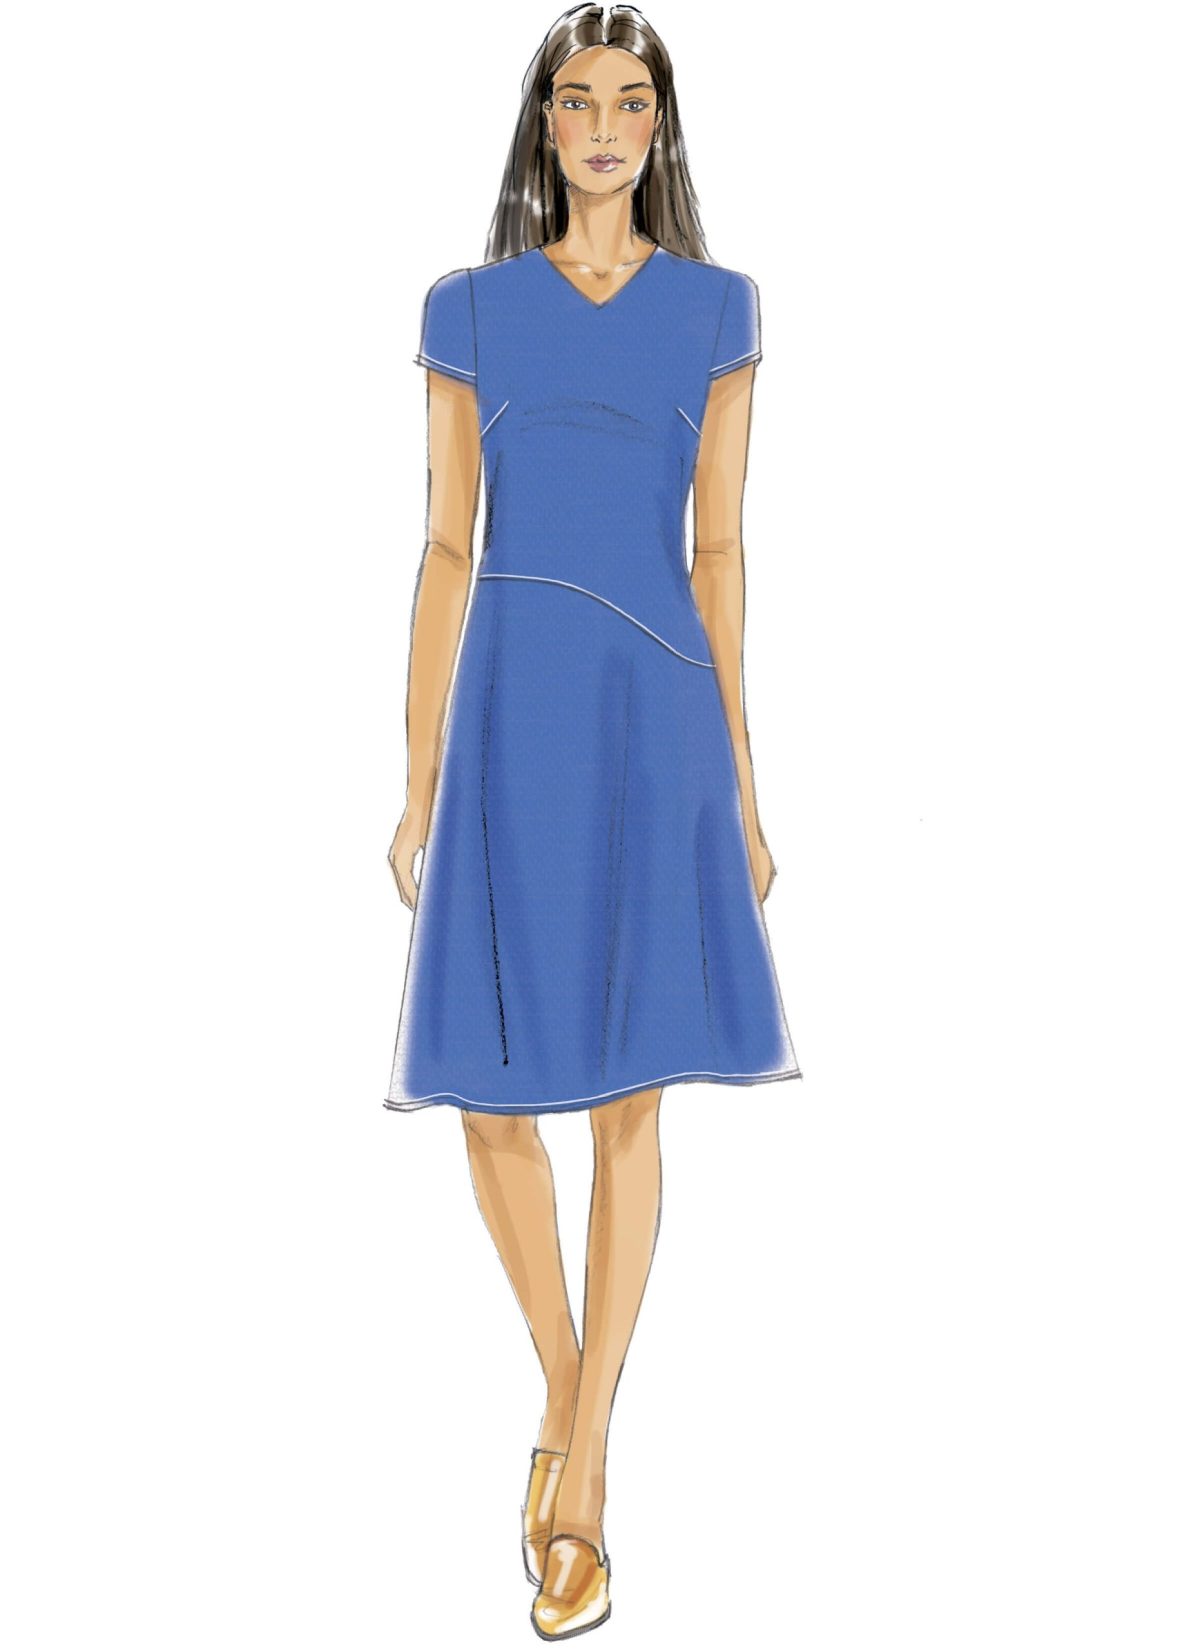 Butterick Sewing Pattern B6480 Misses' Fitted Dresses with Hip Detail, Neck and Sleeve Variations